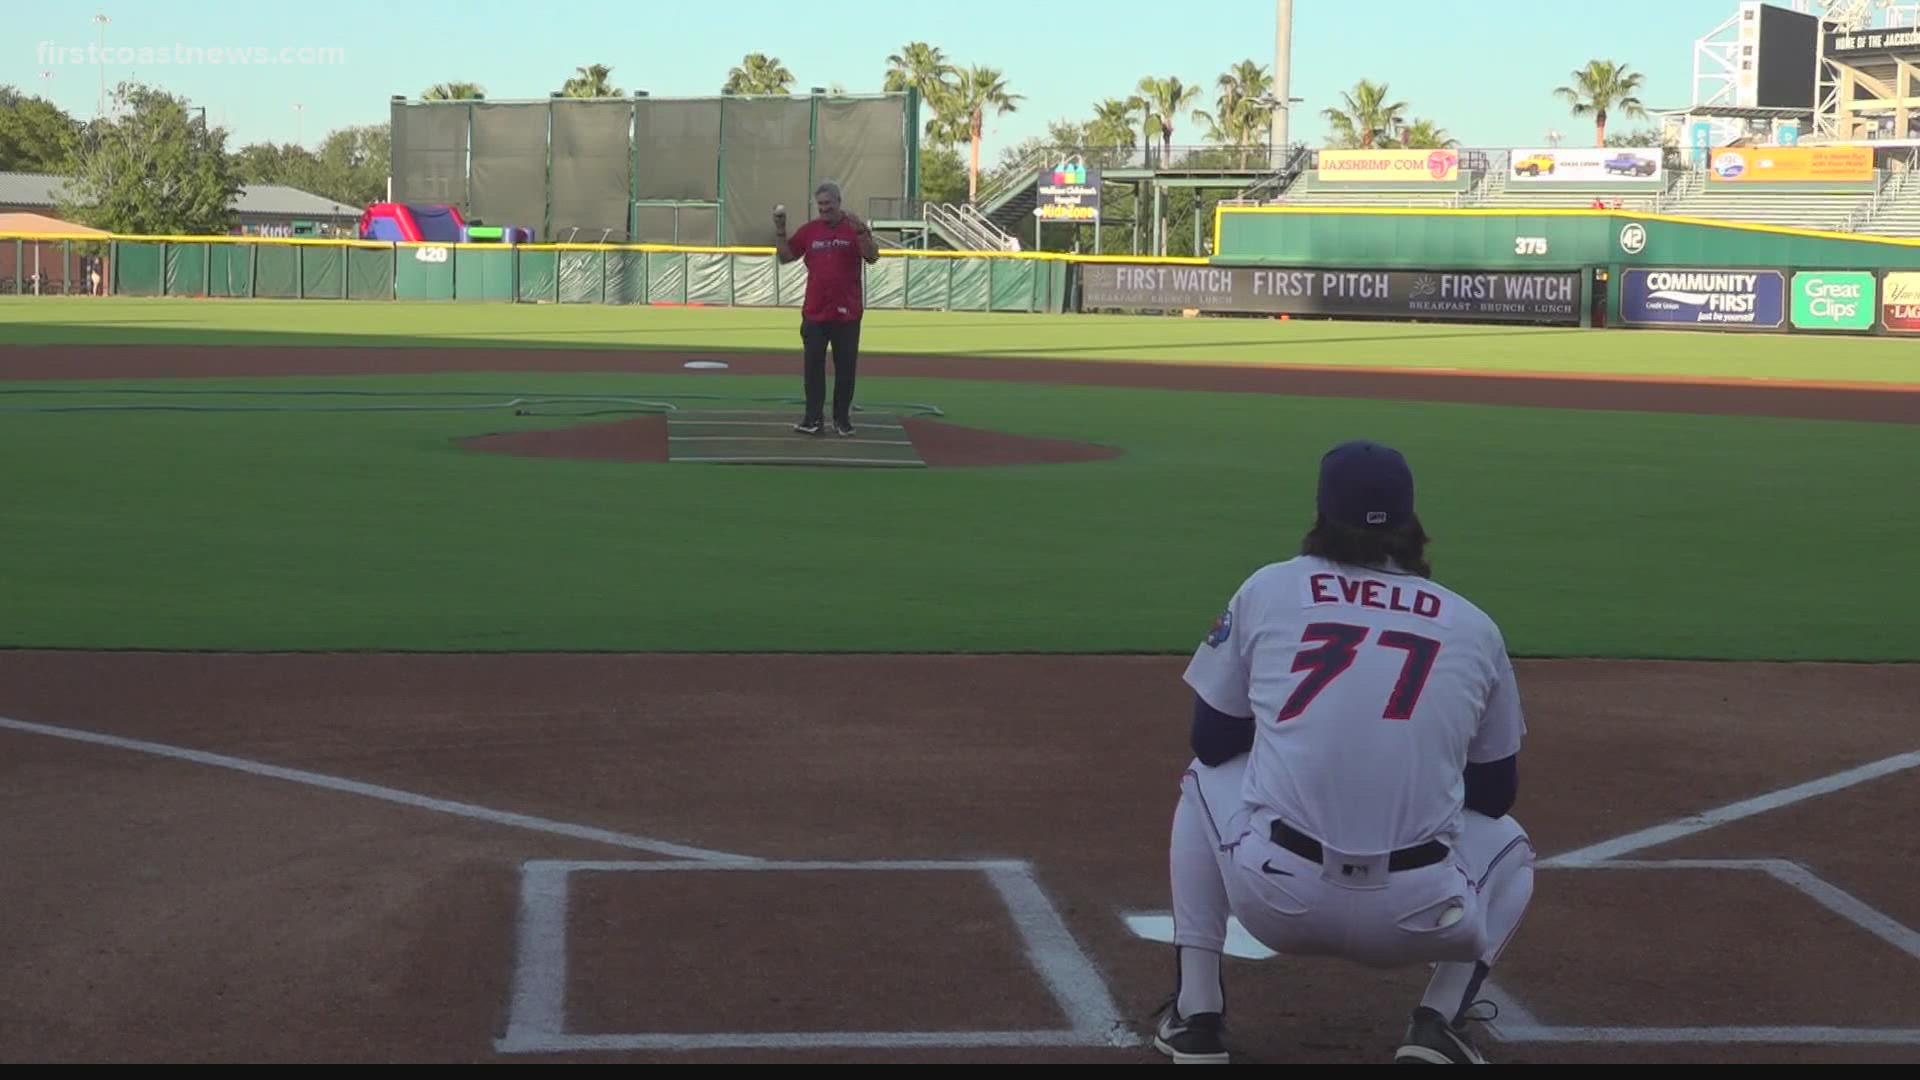 Doug Pederson threw out the first pitch at Tuesday night's Jumbo Shrimp game.